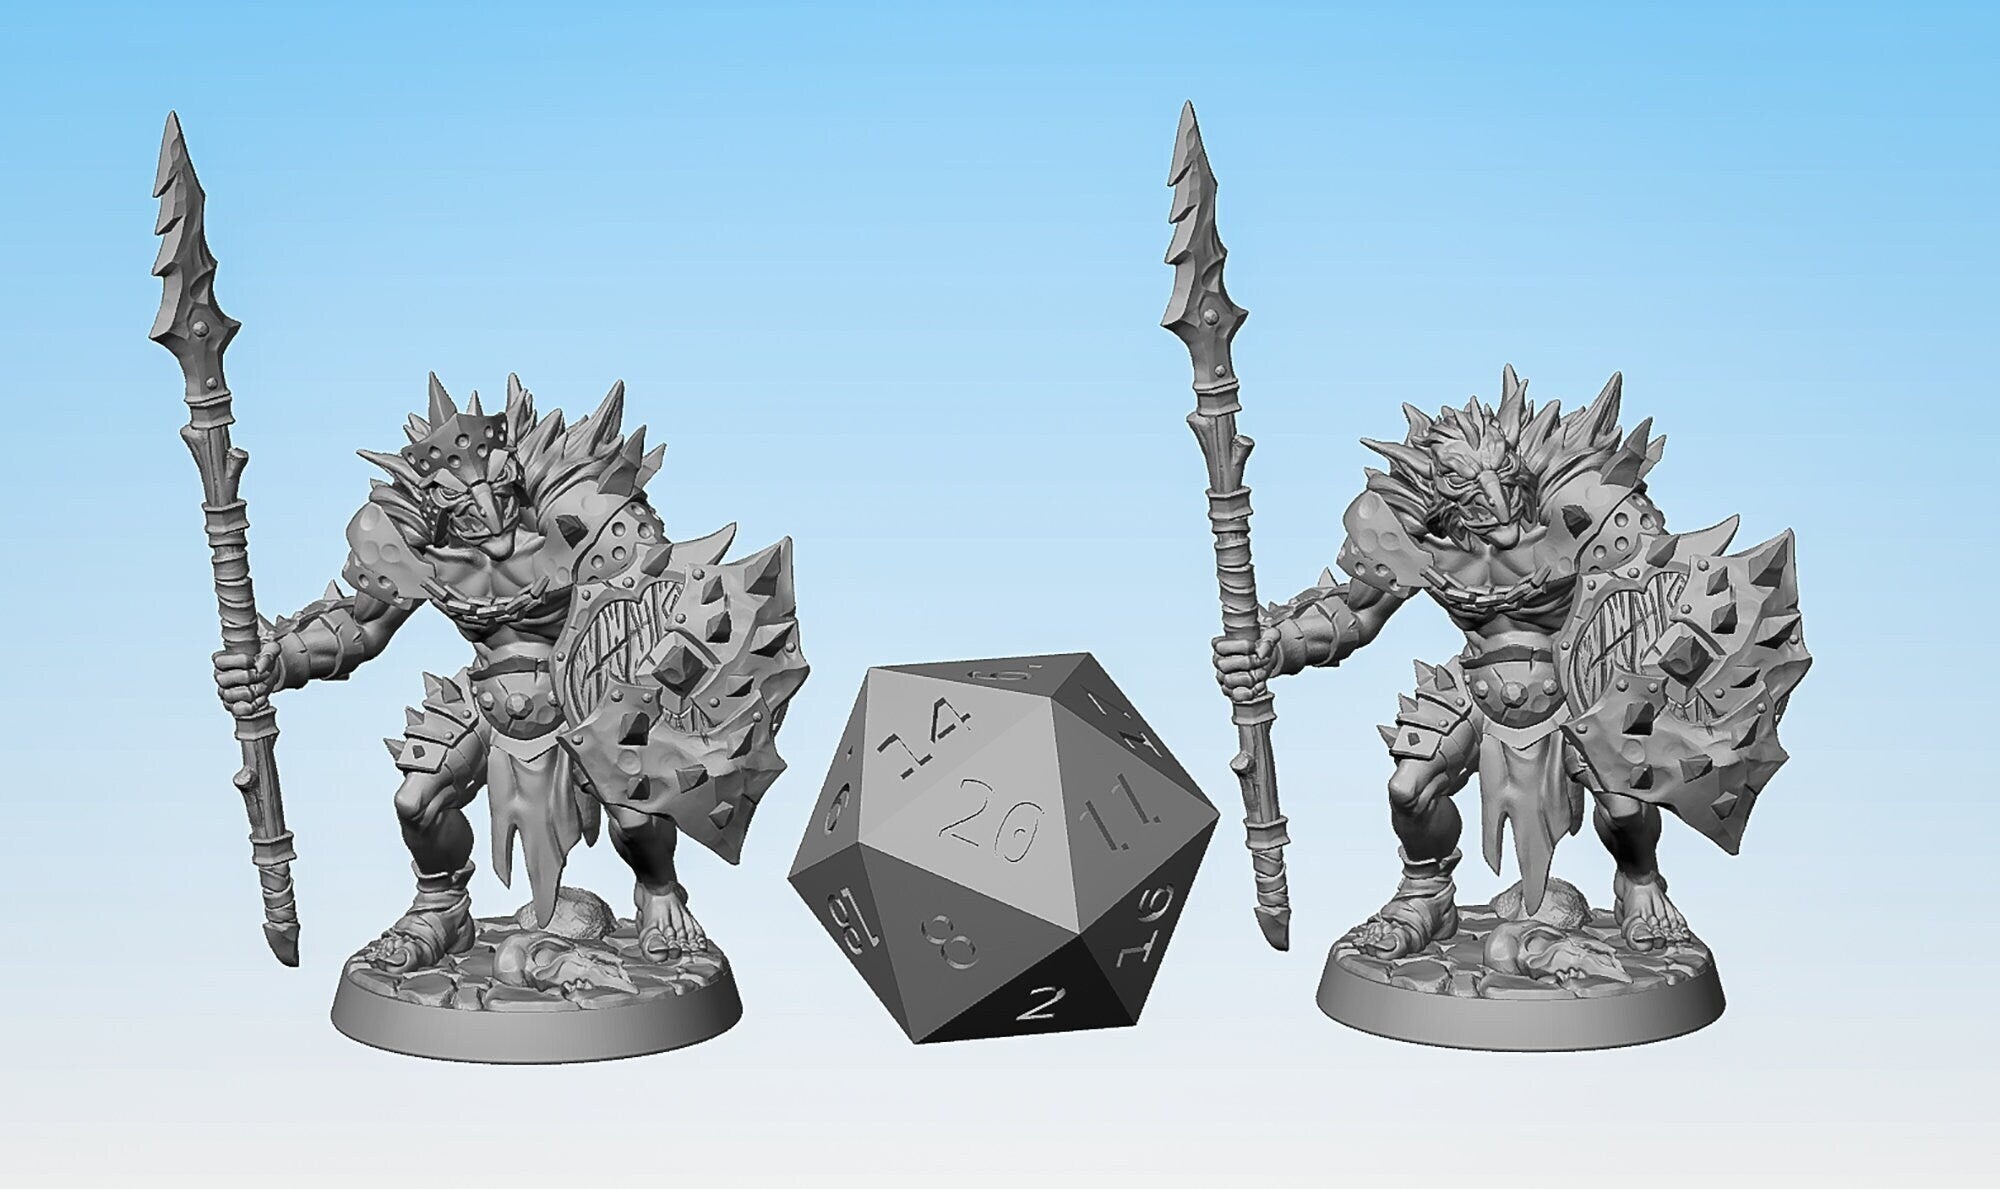 HOBGOBLIN "C" Spear & Shield | Dungeons and Dragons | DnD | Pathfinder | Tabletop | RPG | Hero Size | 28 mm-Role Playing Miniatures